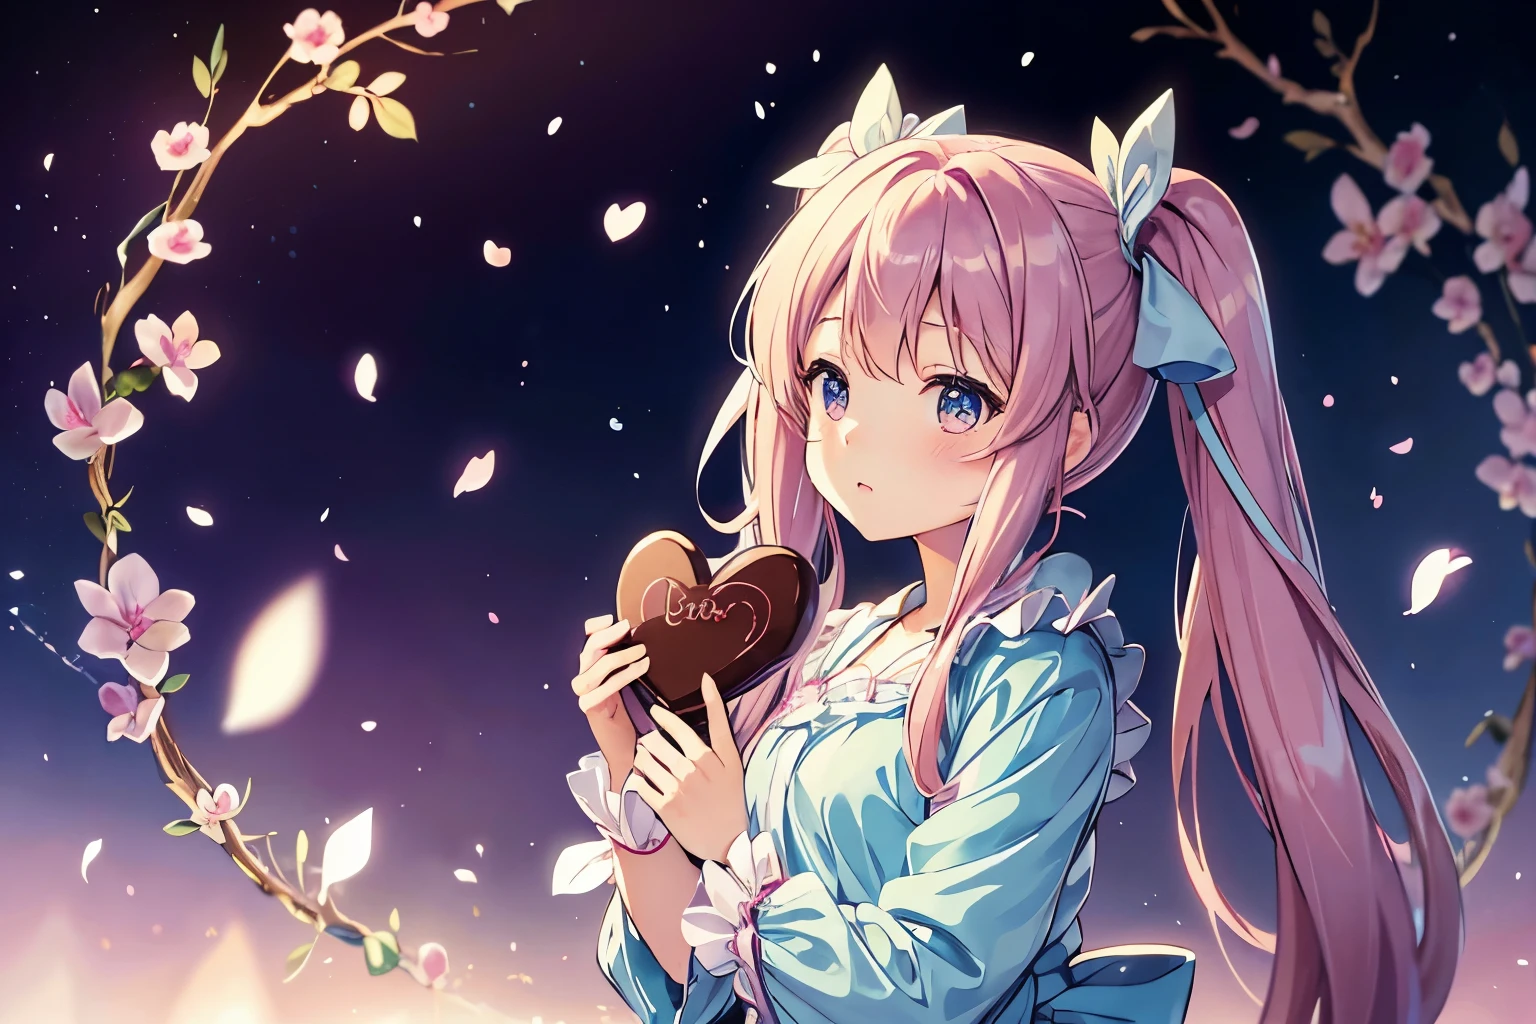 Orchid Flower Garden((photograph)).light blue long hair、twin tails、anime girl with big chocolate for valentine、ribbon, holding chocolate in hand、anime moe art style,cute lolita costume、 Cute girl anime visual, small change girl, anime food,  change, change, cute anime girl, best anime 4k, everyone, anime style 4k, 